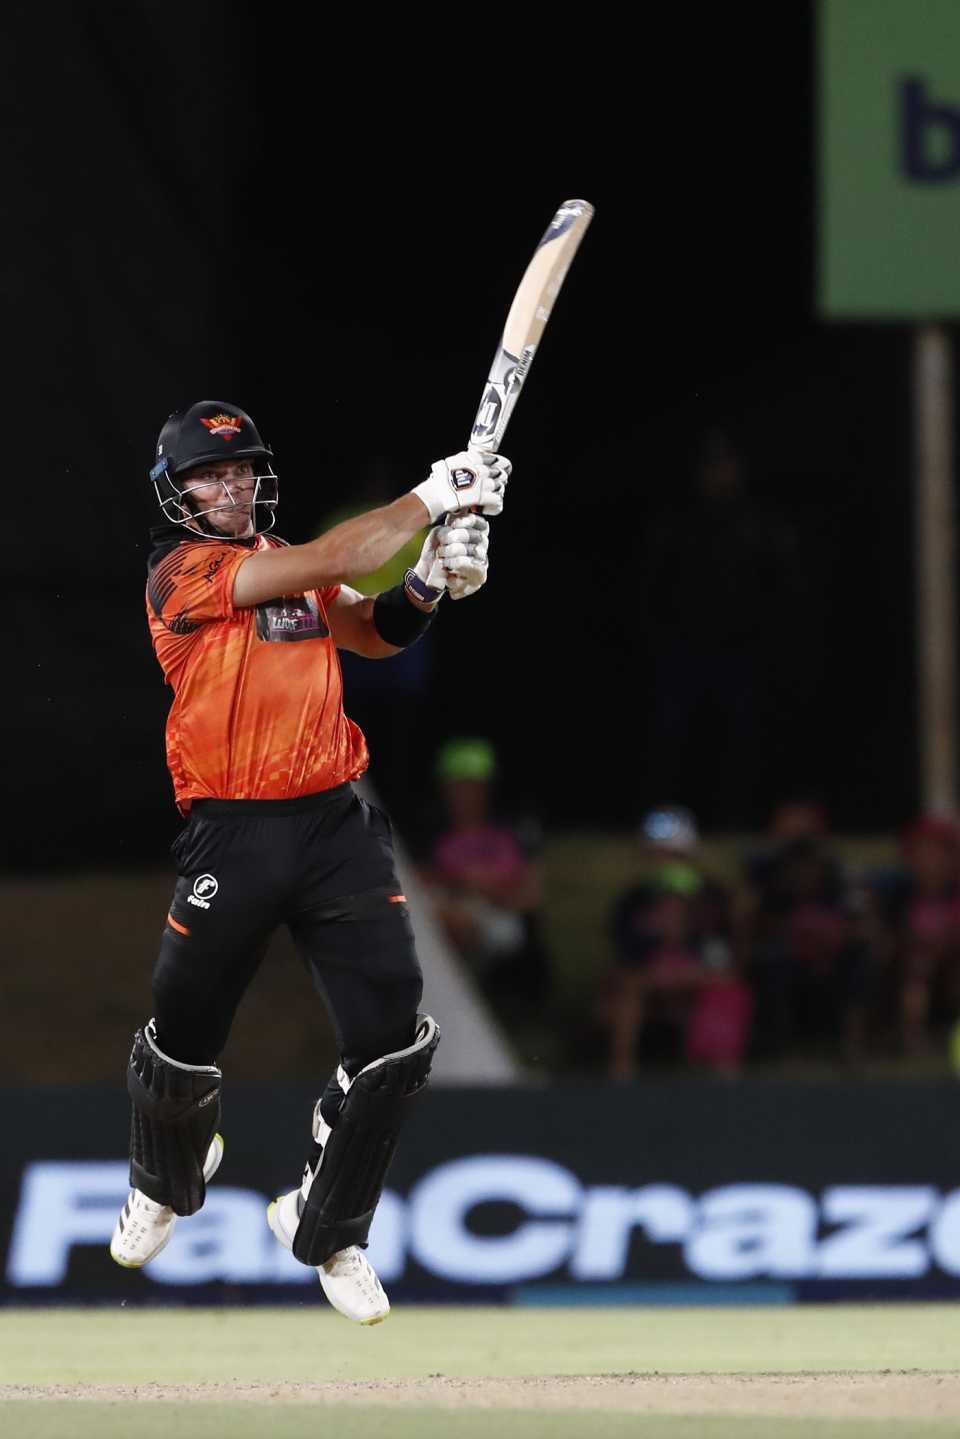 Tristan Stubbs struck a six at a crucial juncture in the game